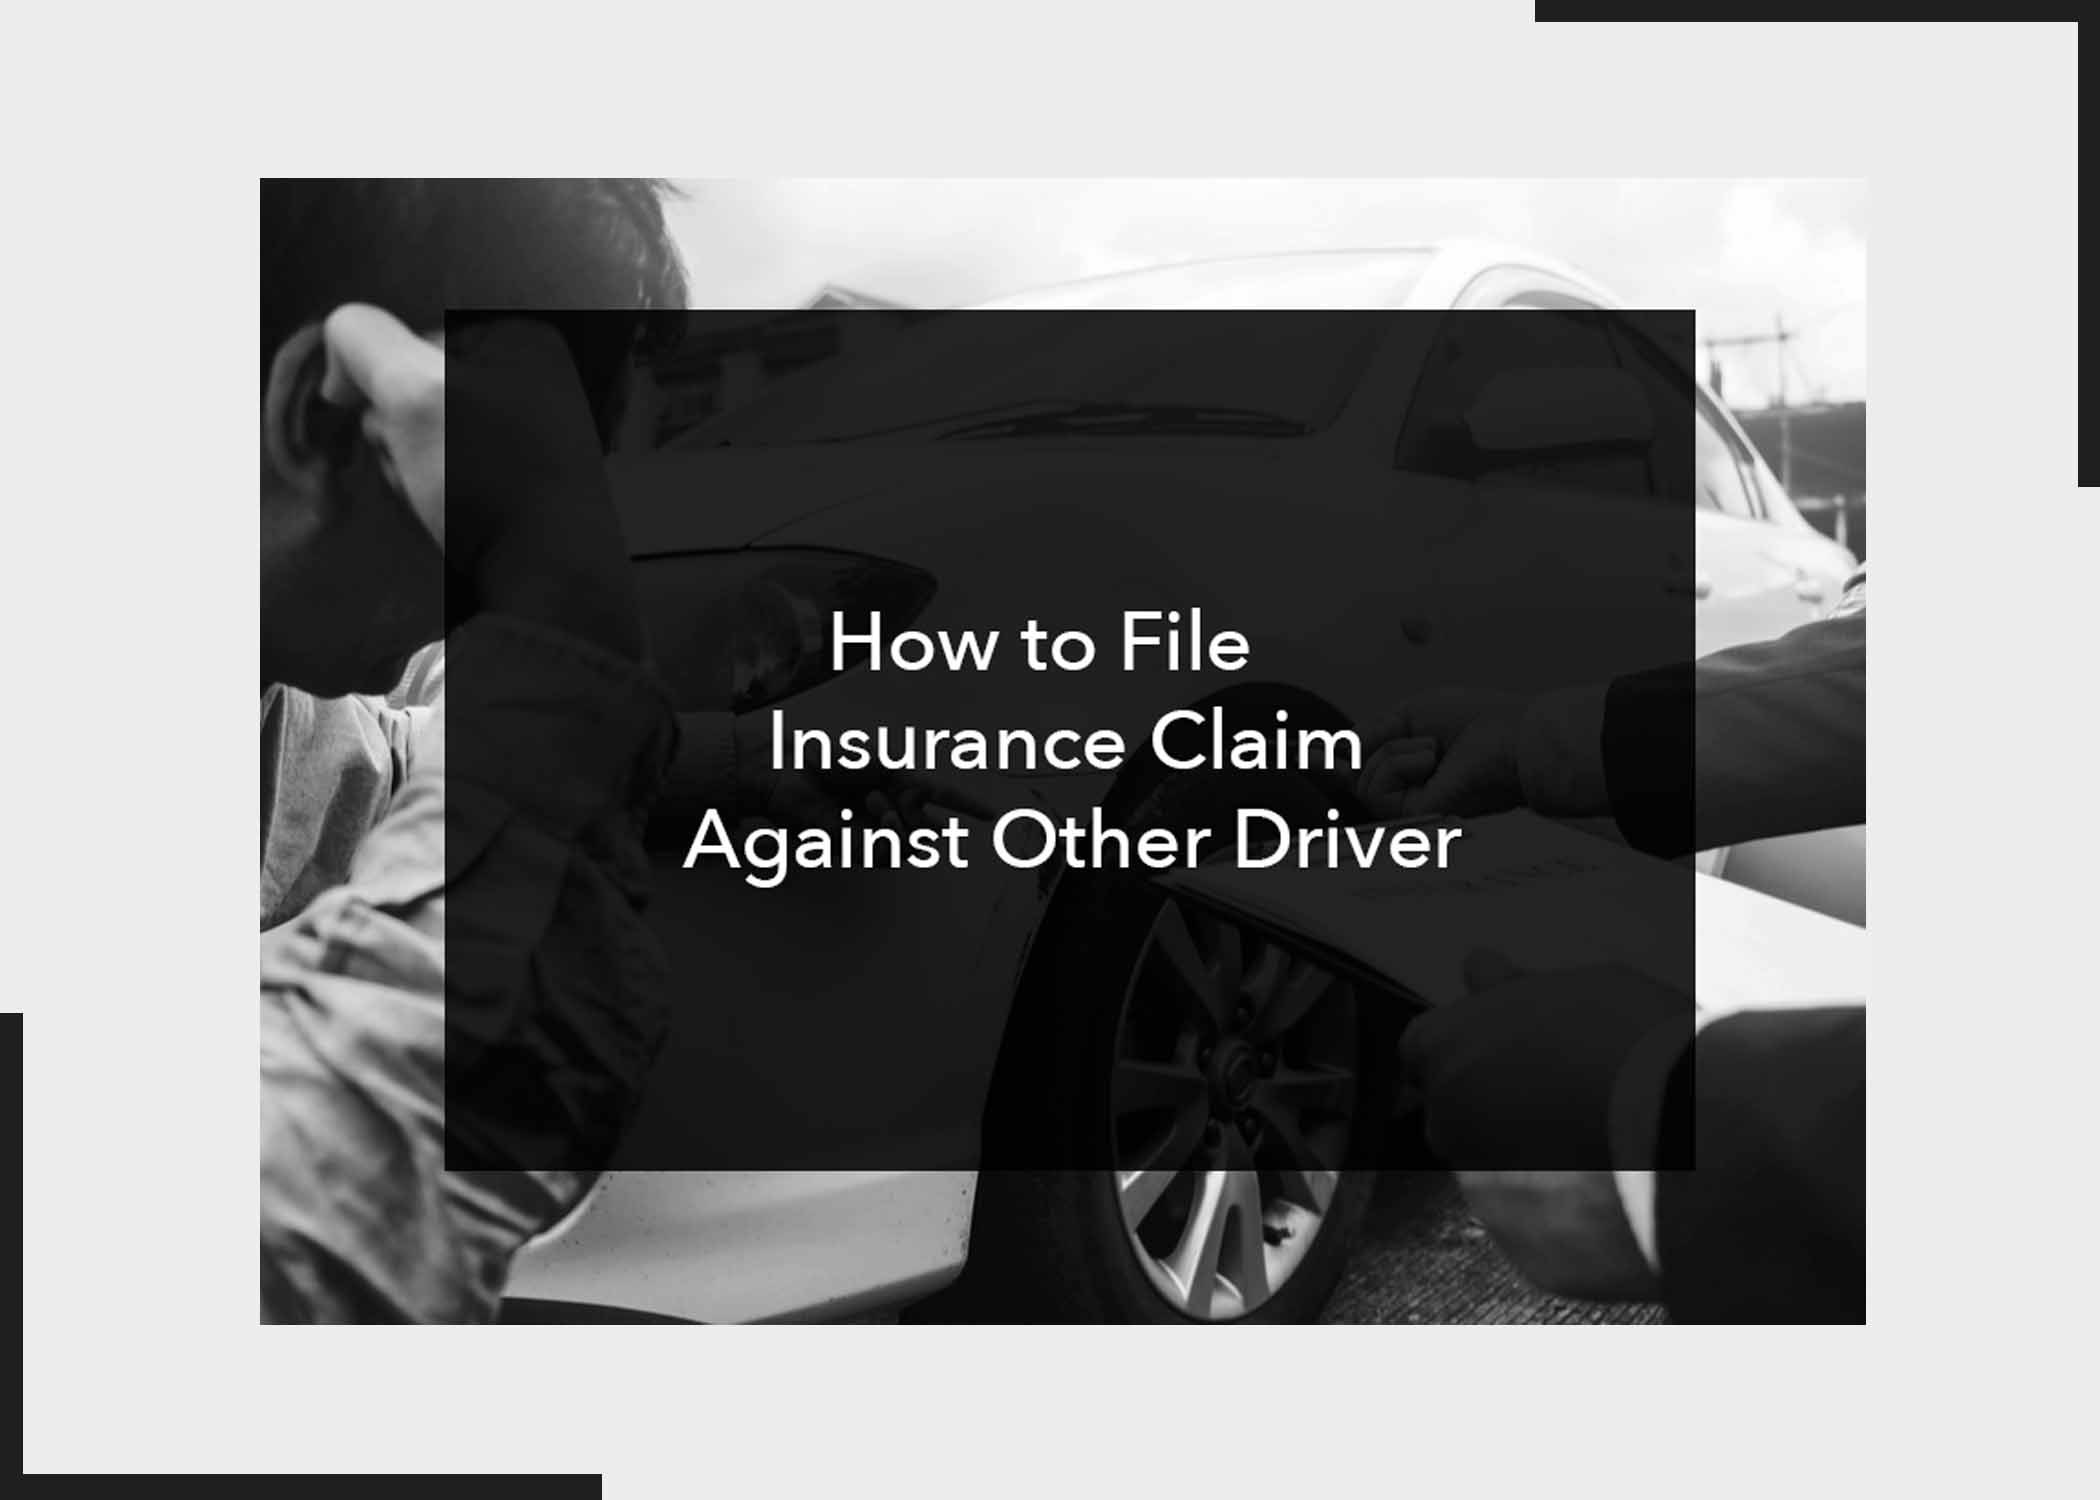 How to File Insurance Claim Against Other Driver